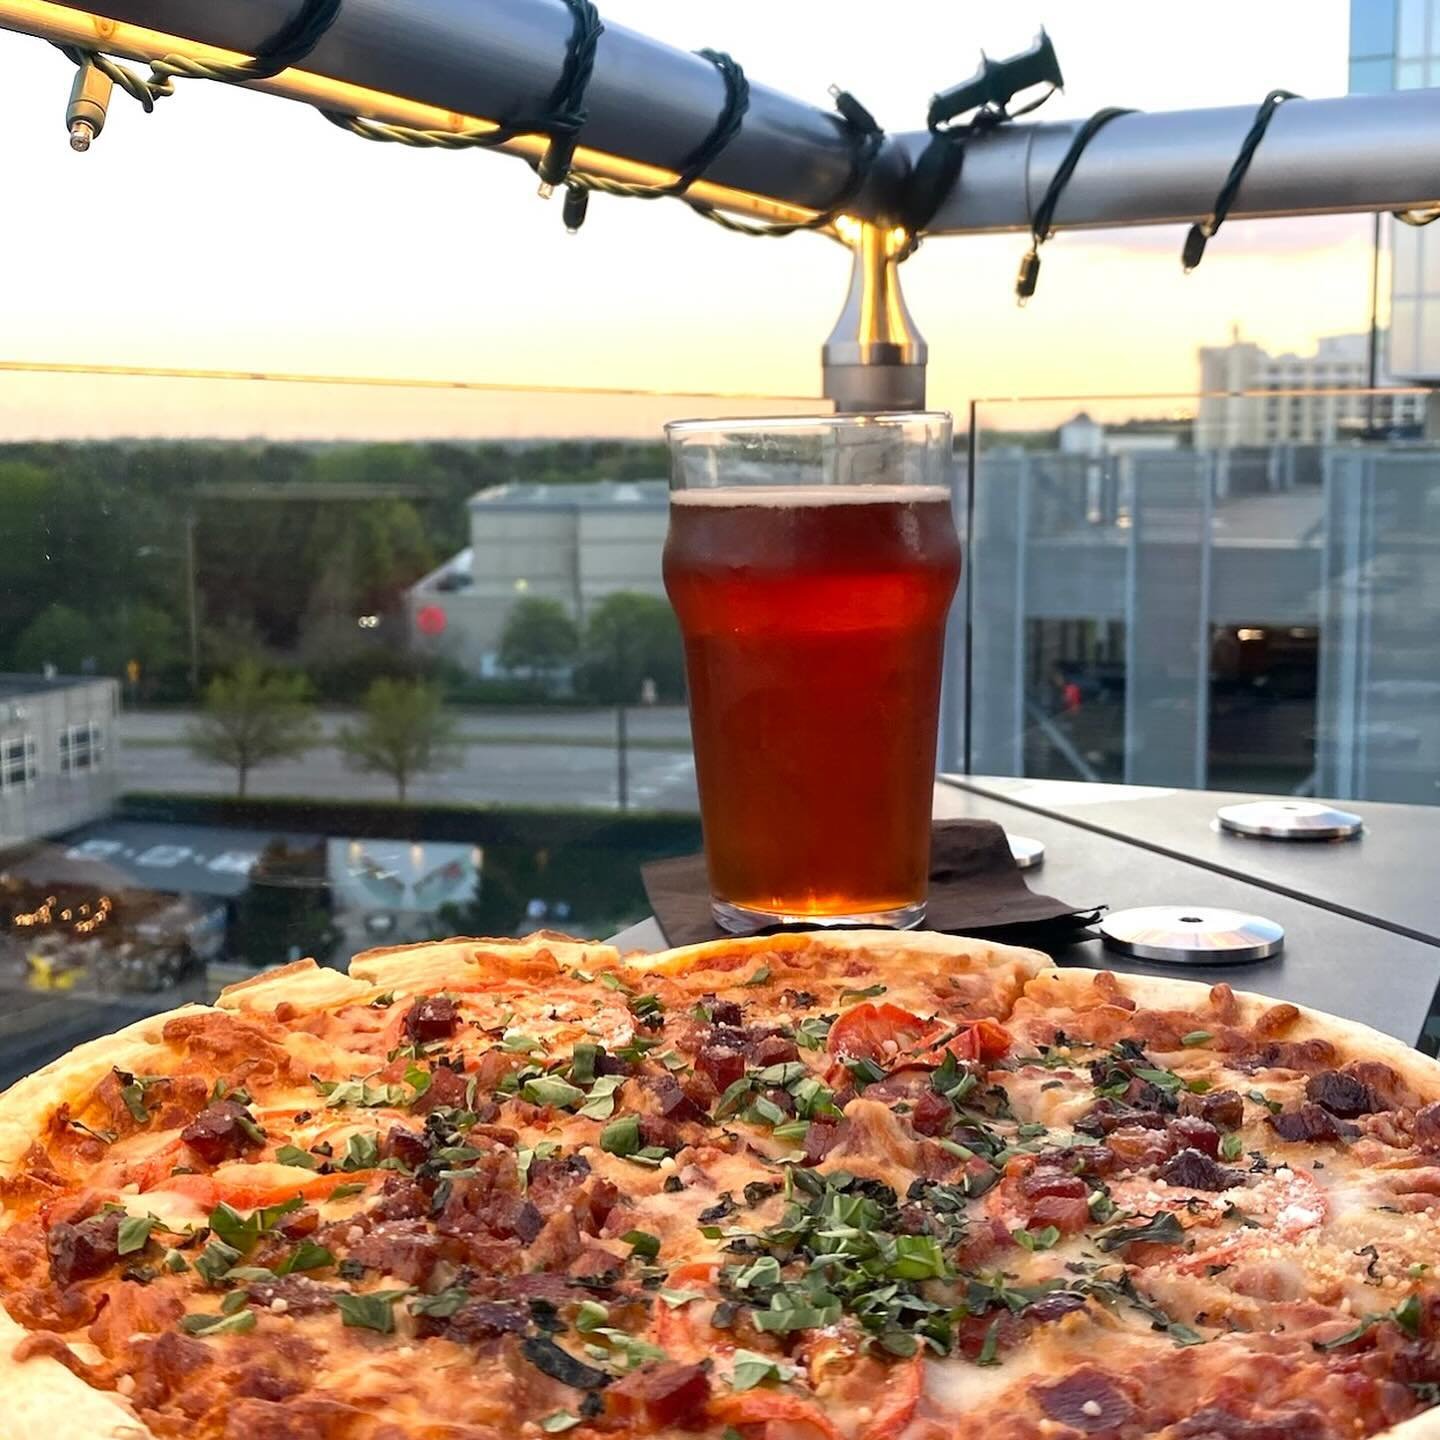 National Beer Day lands on Eclipse Day 🤩

Come in today for an ice cold beer, a pizza, and watch the Eclipse on the rooftop! Don&rsquo;t forget to bring your glasses! 
 
.
.

📍 AC HOTEL
Level7 Rooftop Bar
101 Park at North Hills St, 7th Floor

#lev